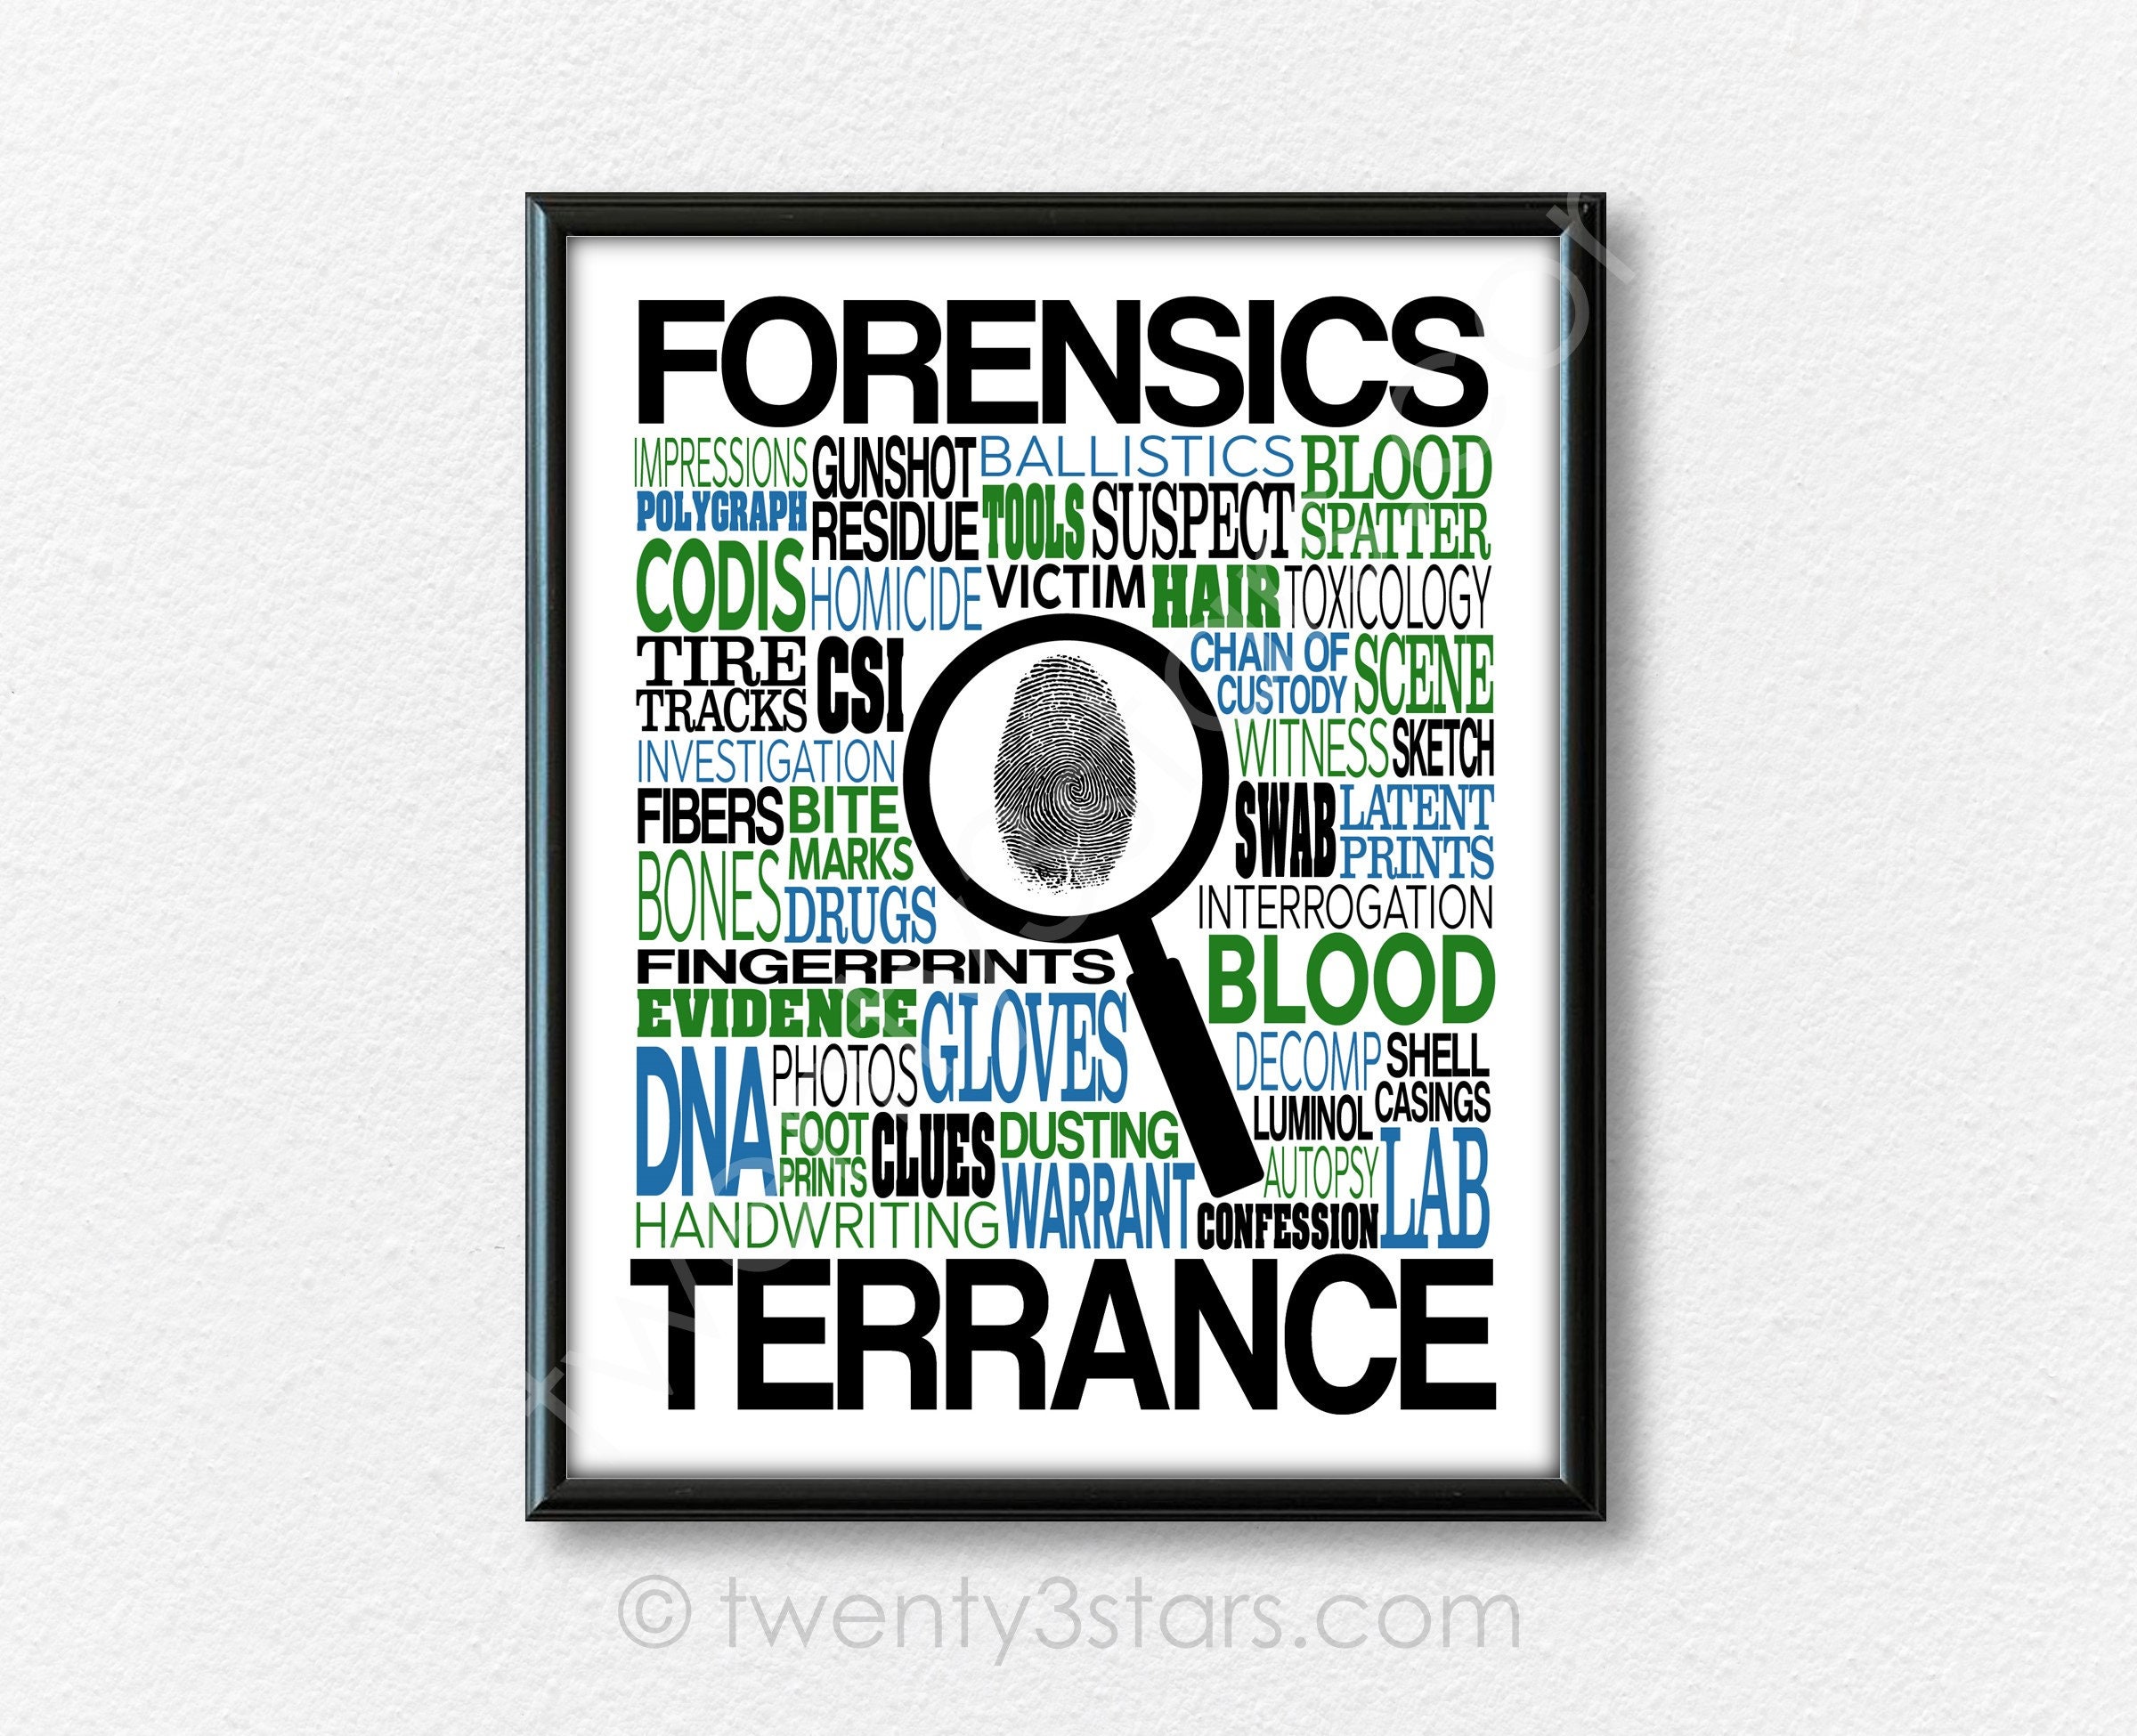 Forensic Anthropology Review Puzzle Activity- Print & Digital  Elementary  science activities, Forensic anthropology, Forensics